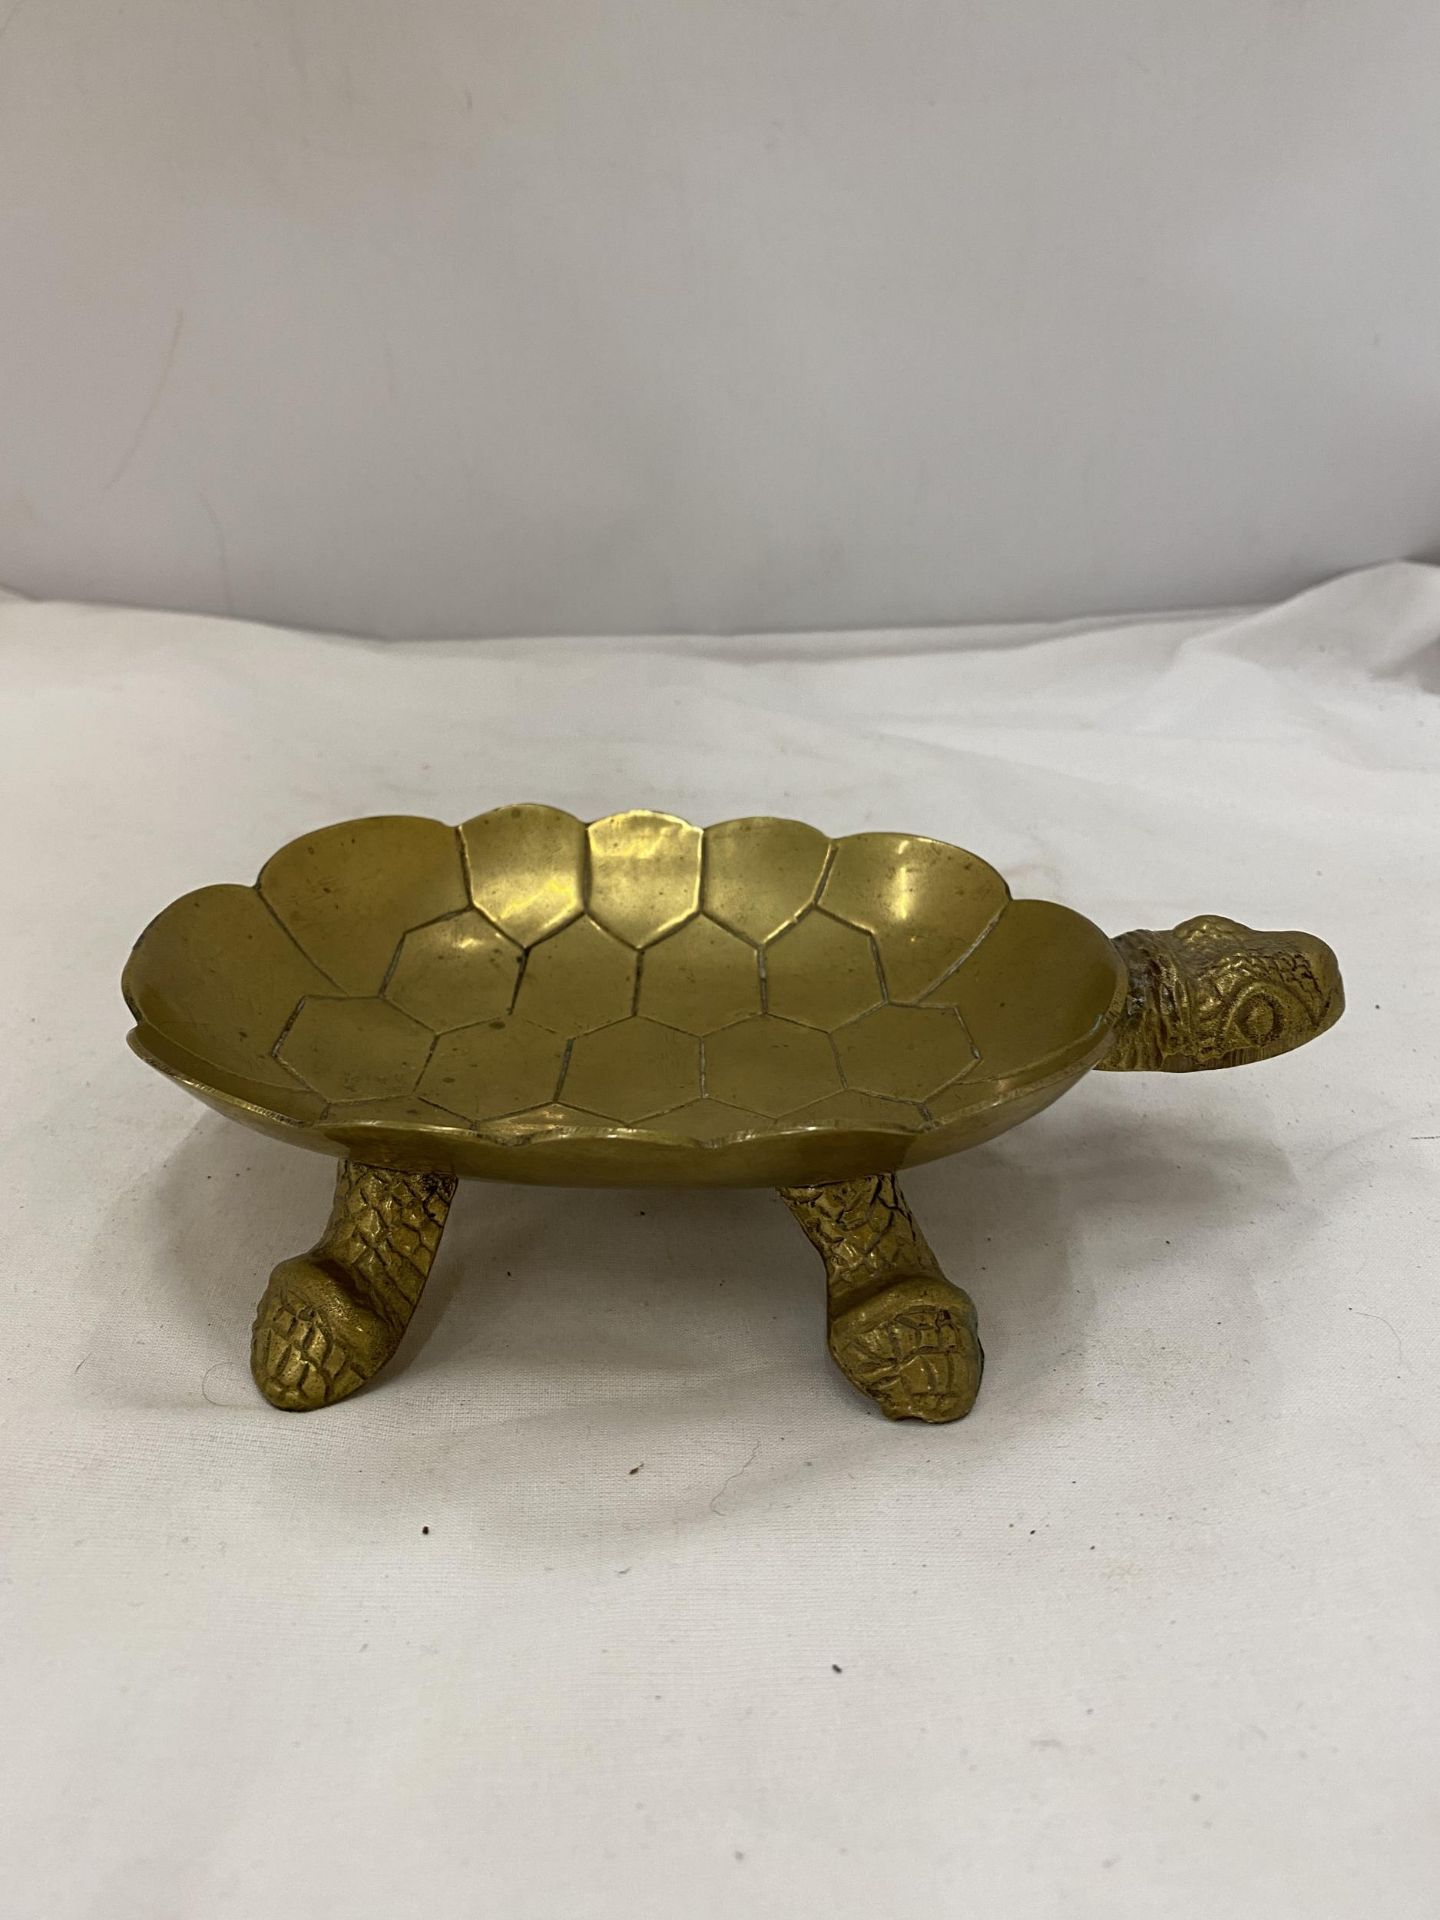 A VINTAGE BRASS TURTLE DISH - Image 3 of 6